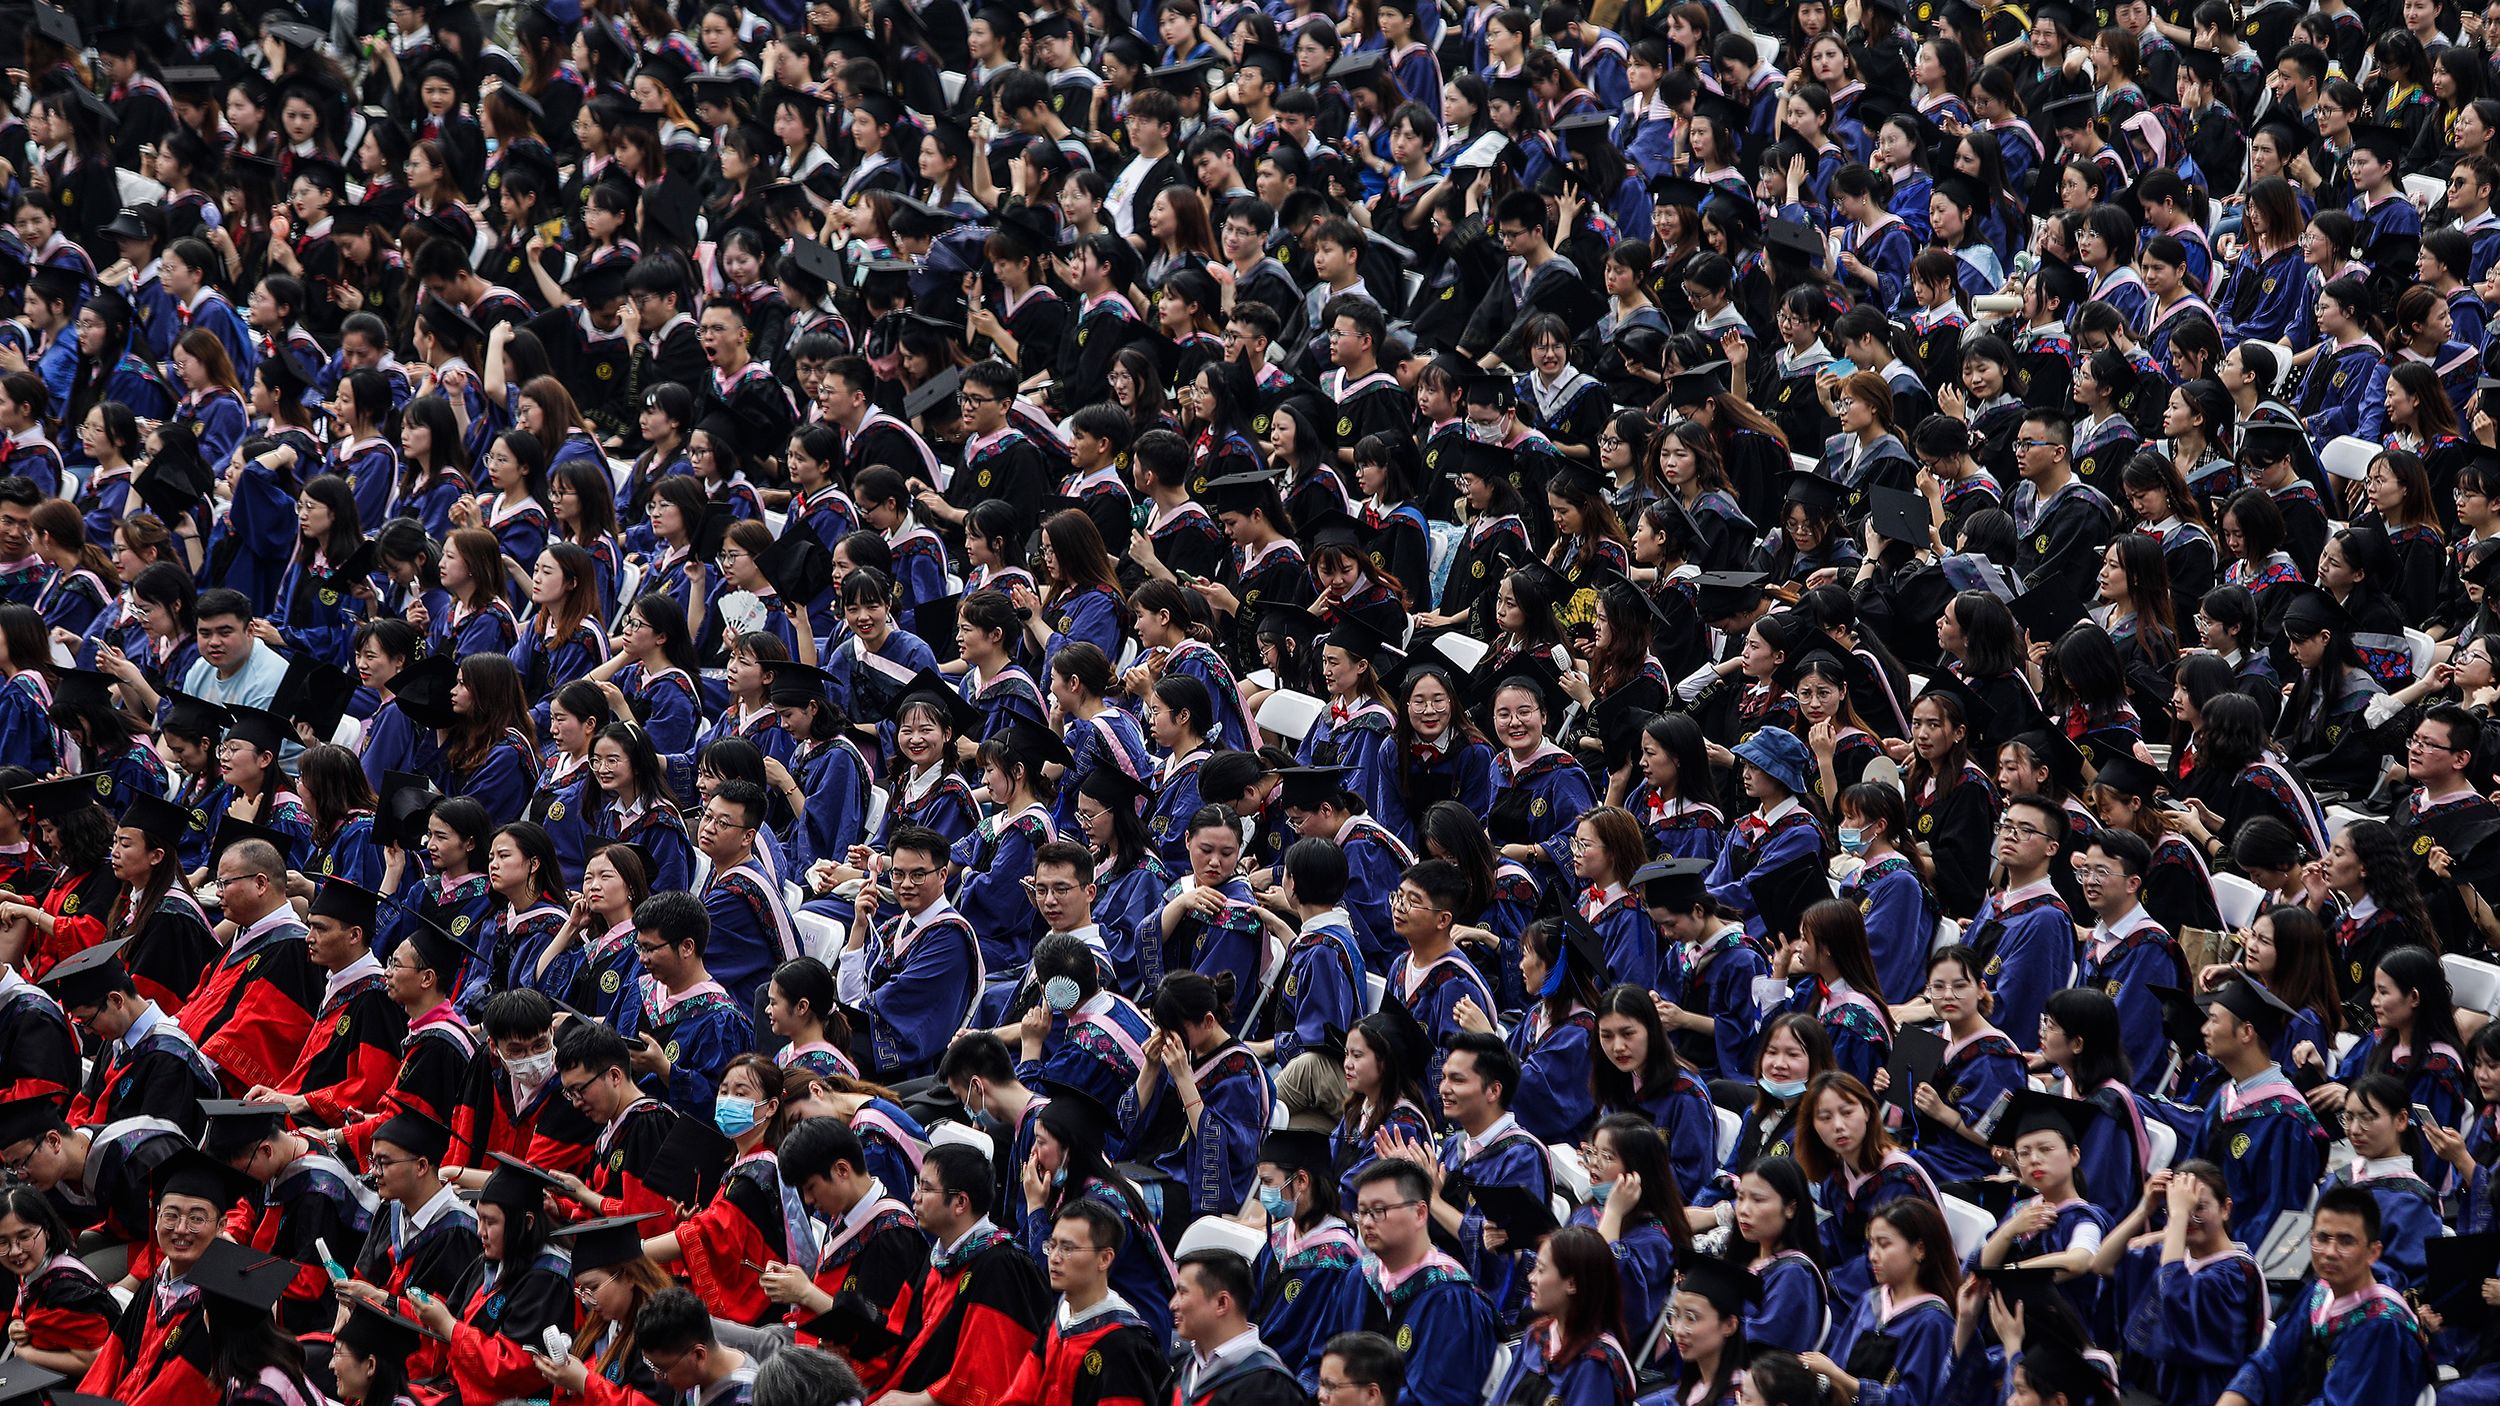 Ten thousand graduates attend their ceremony at Central China Normal University on June 13, 2021 in Wuhan, China.